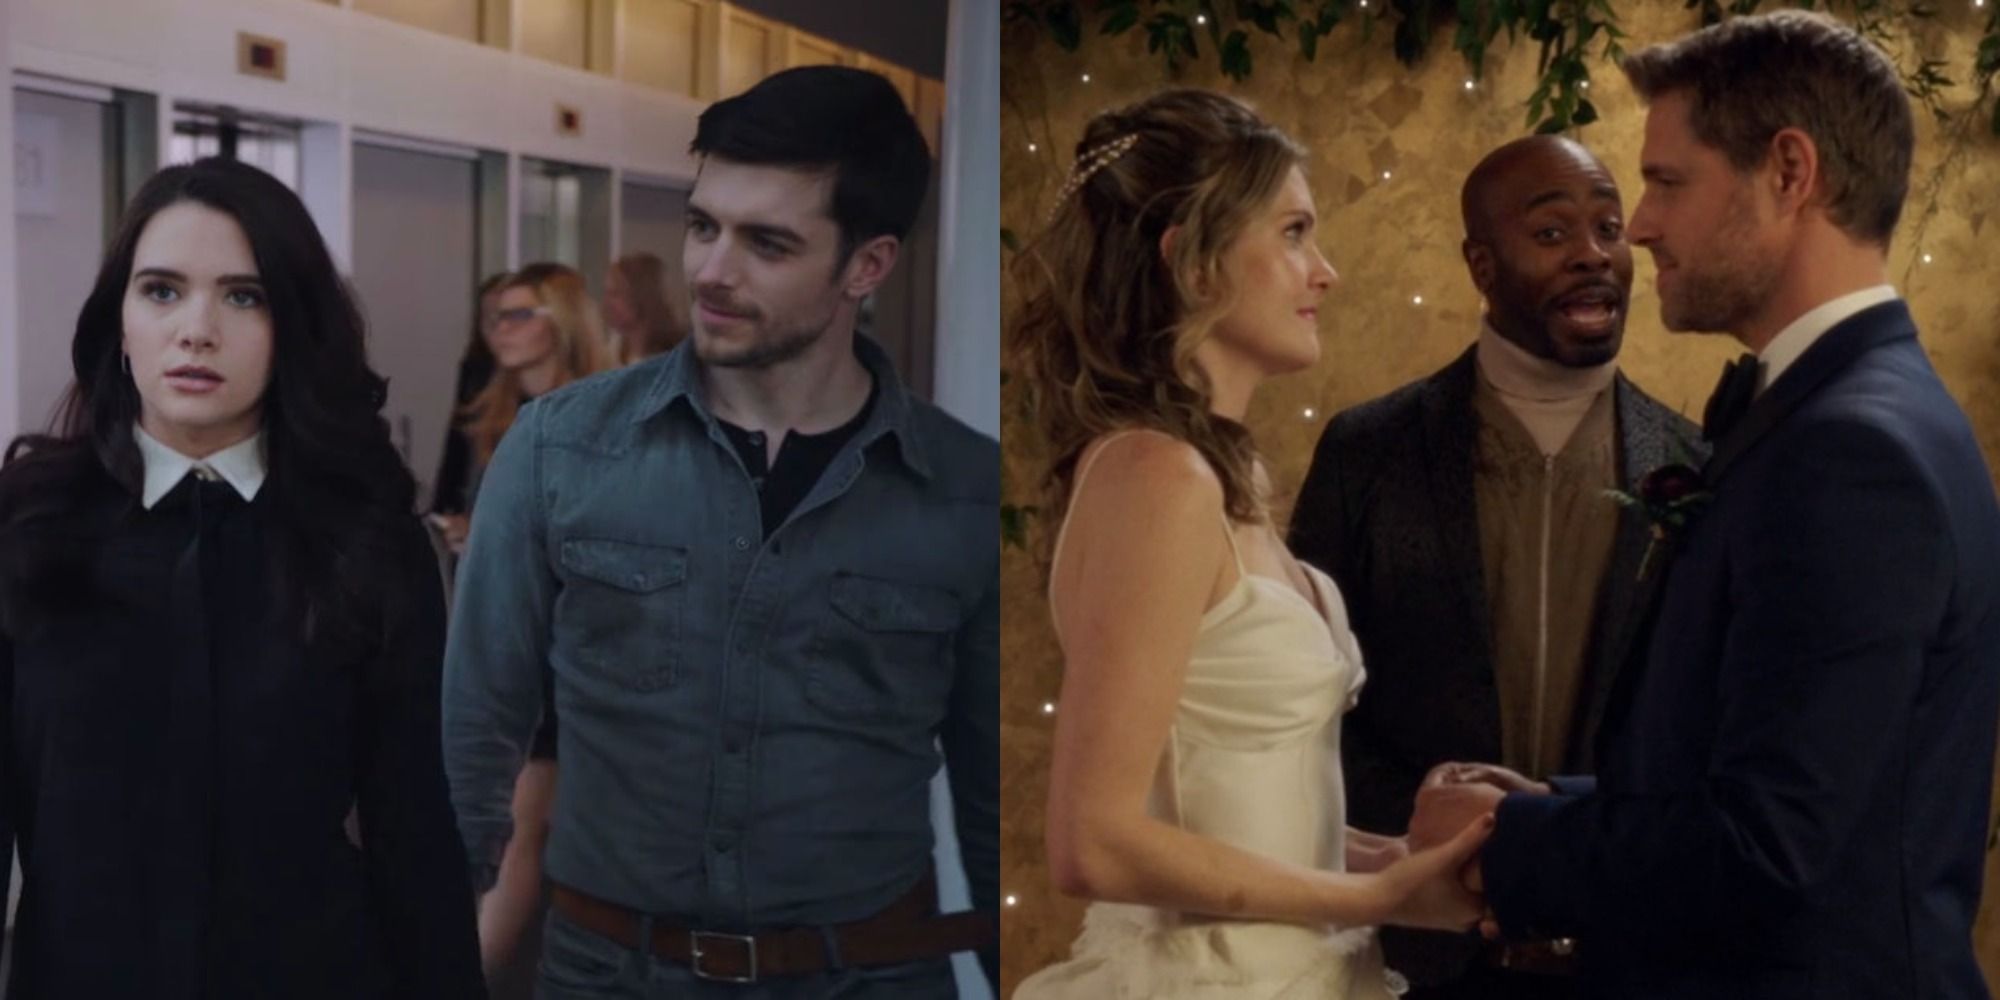 SPlit image showing Jane and Ryan, and Sutton and Richard getting married